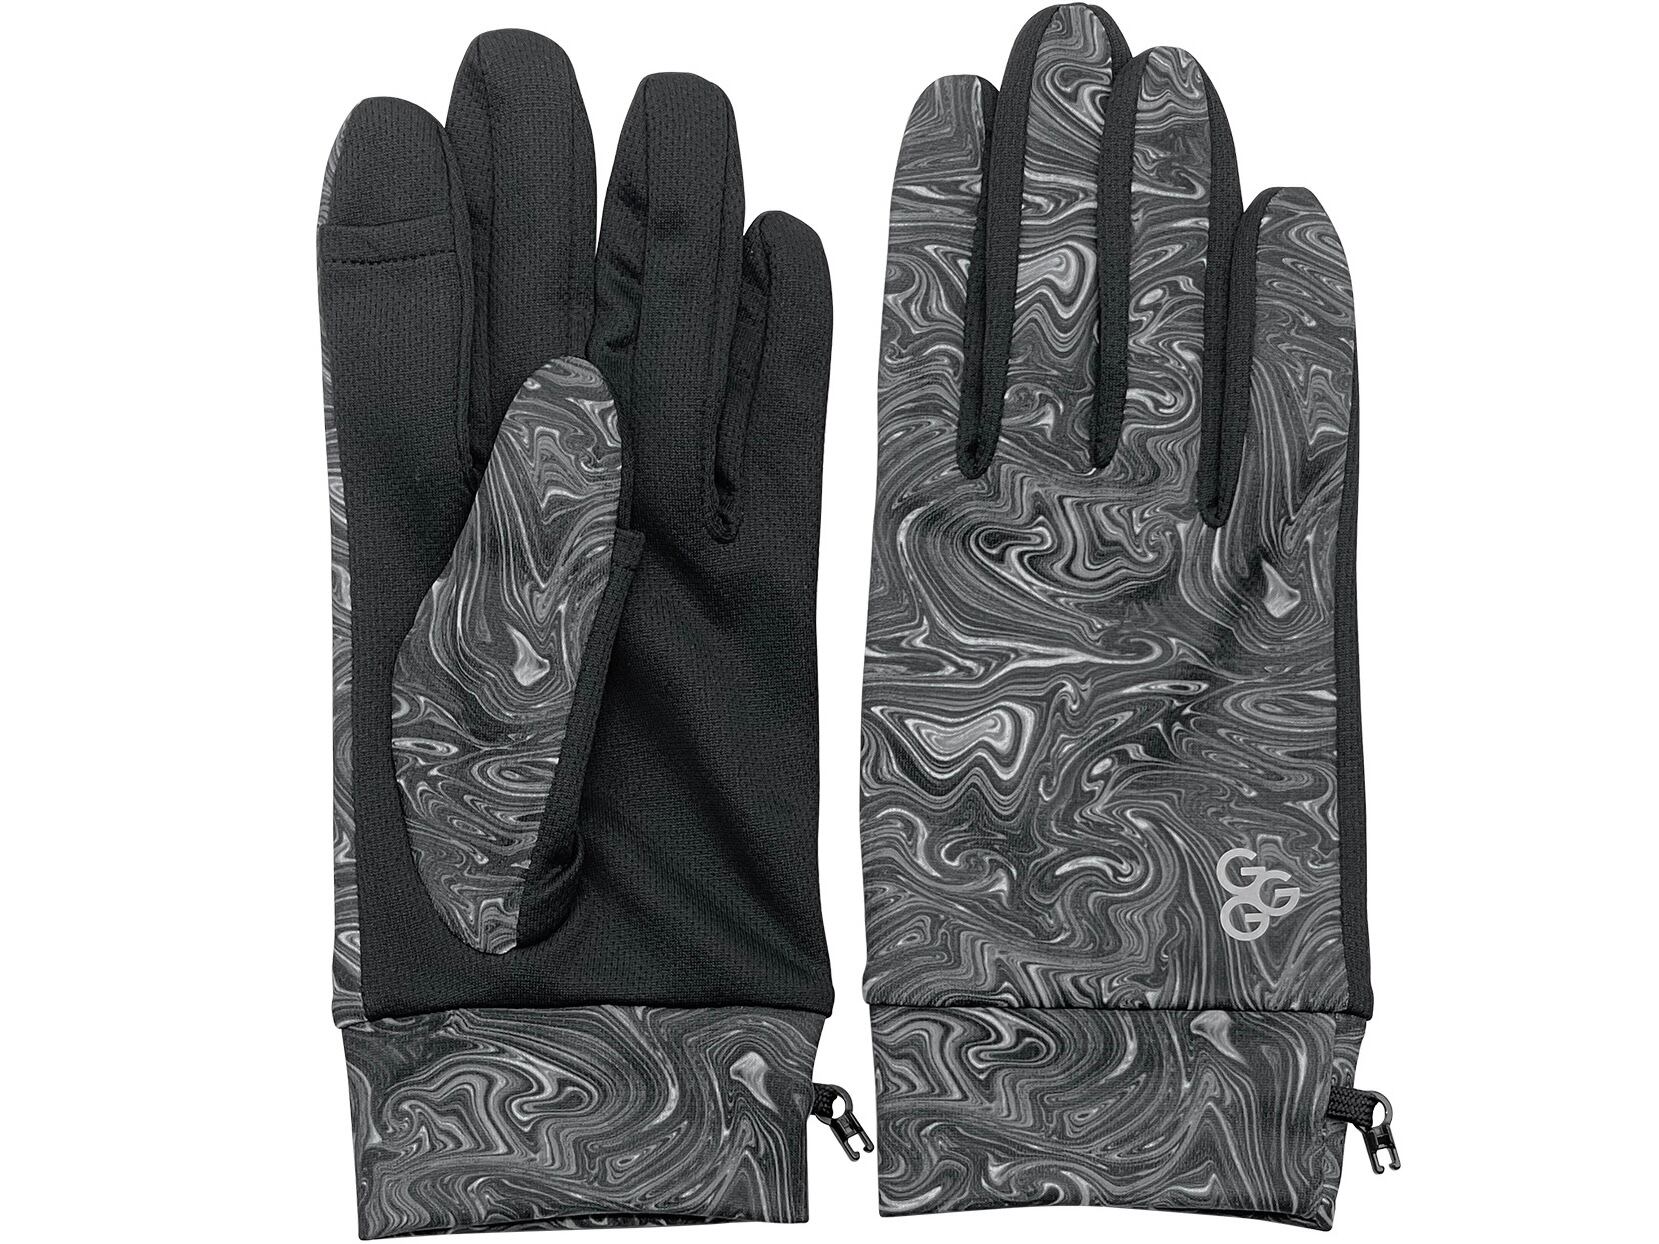 ［P.O.GLOVES］graphic 2.0：marble-black